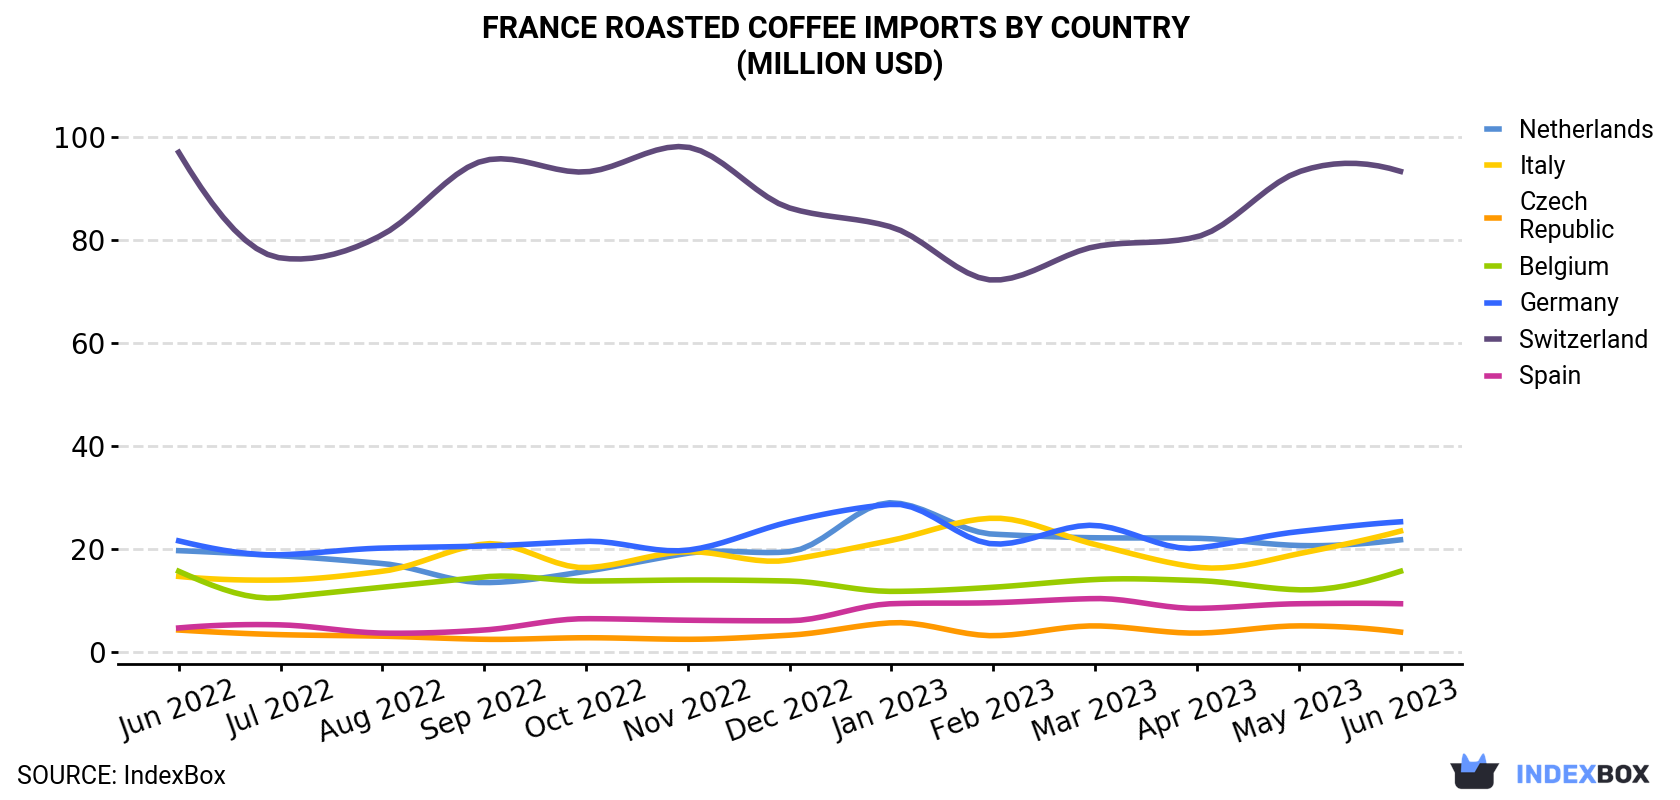 France Roasted Coffee Imports By Country (Million USD)